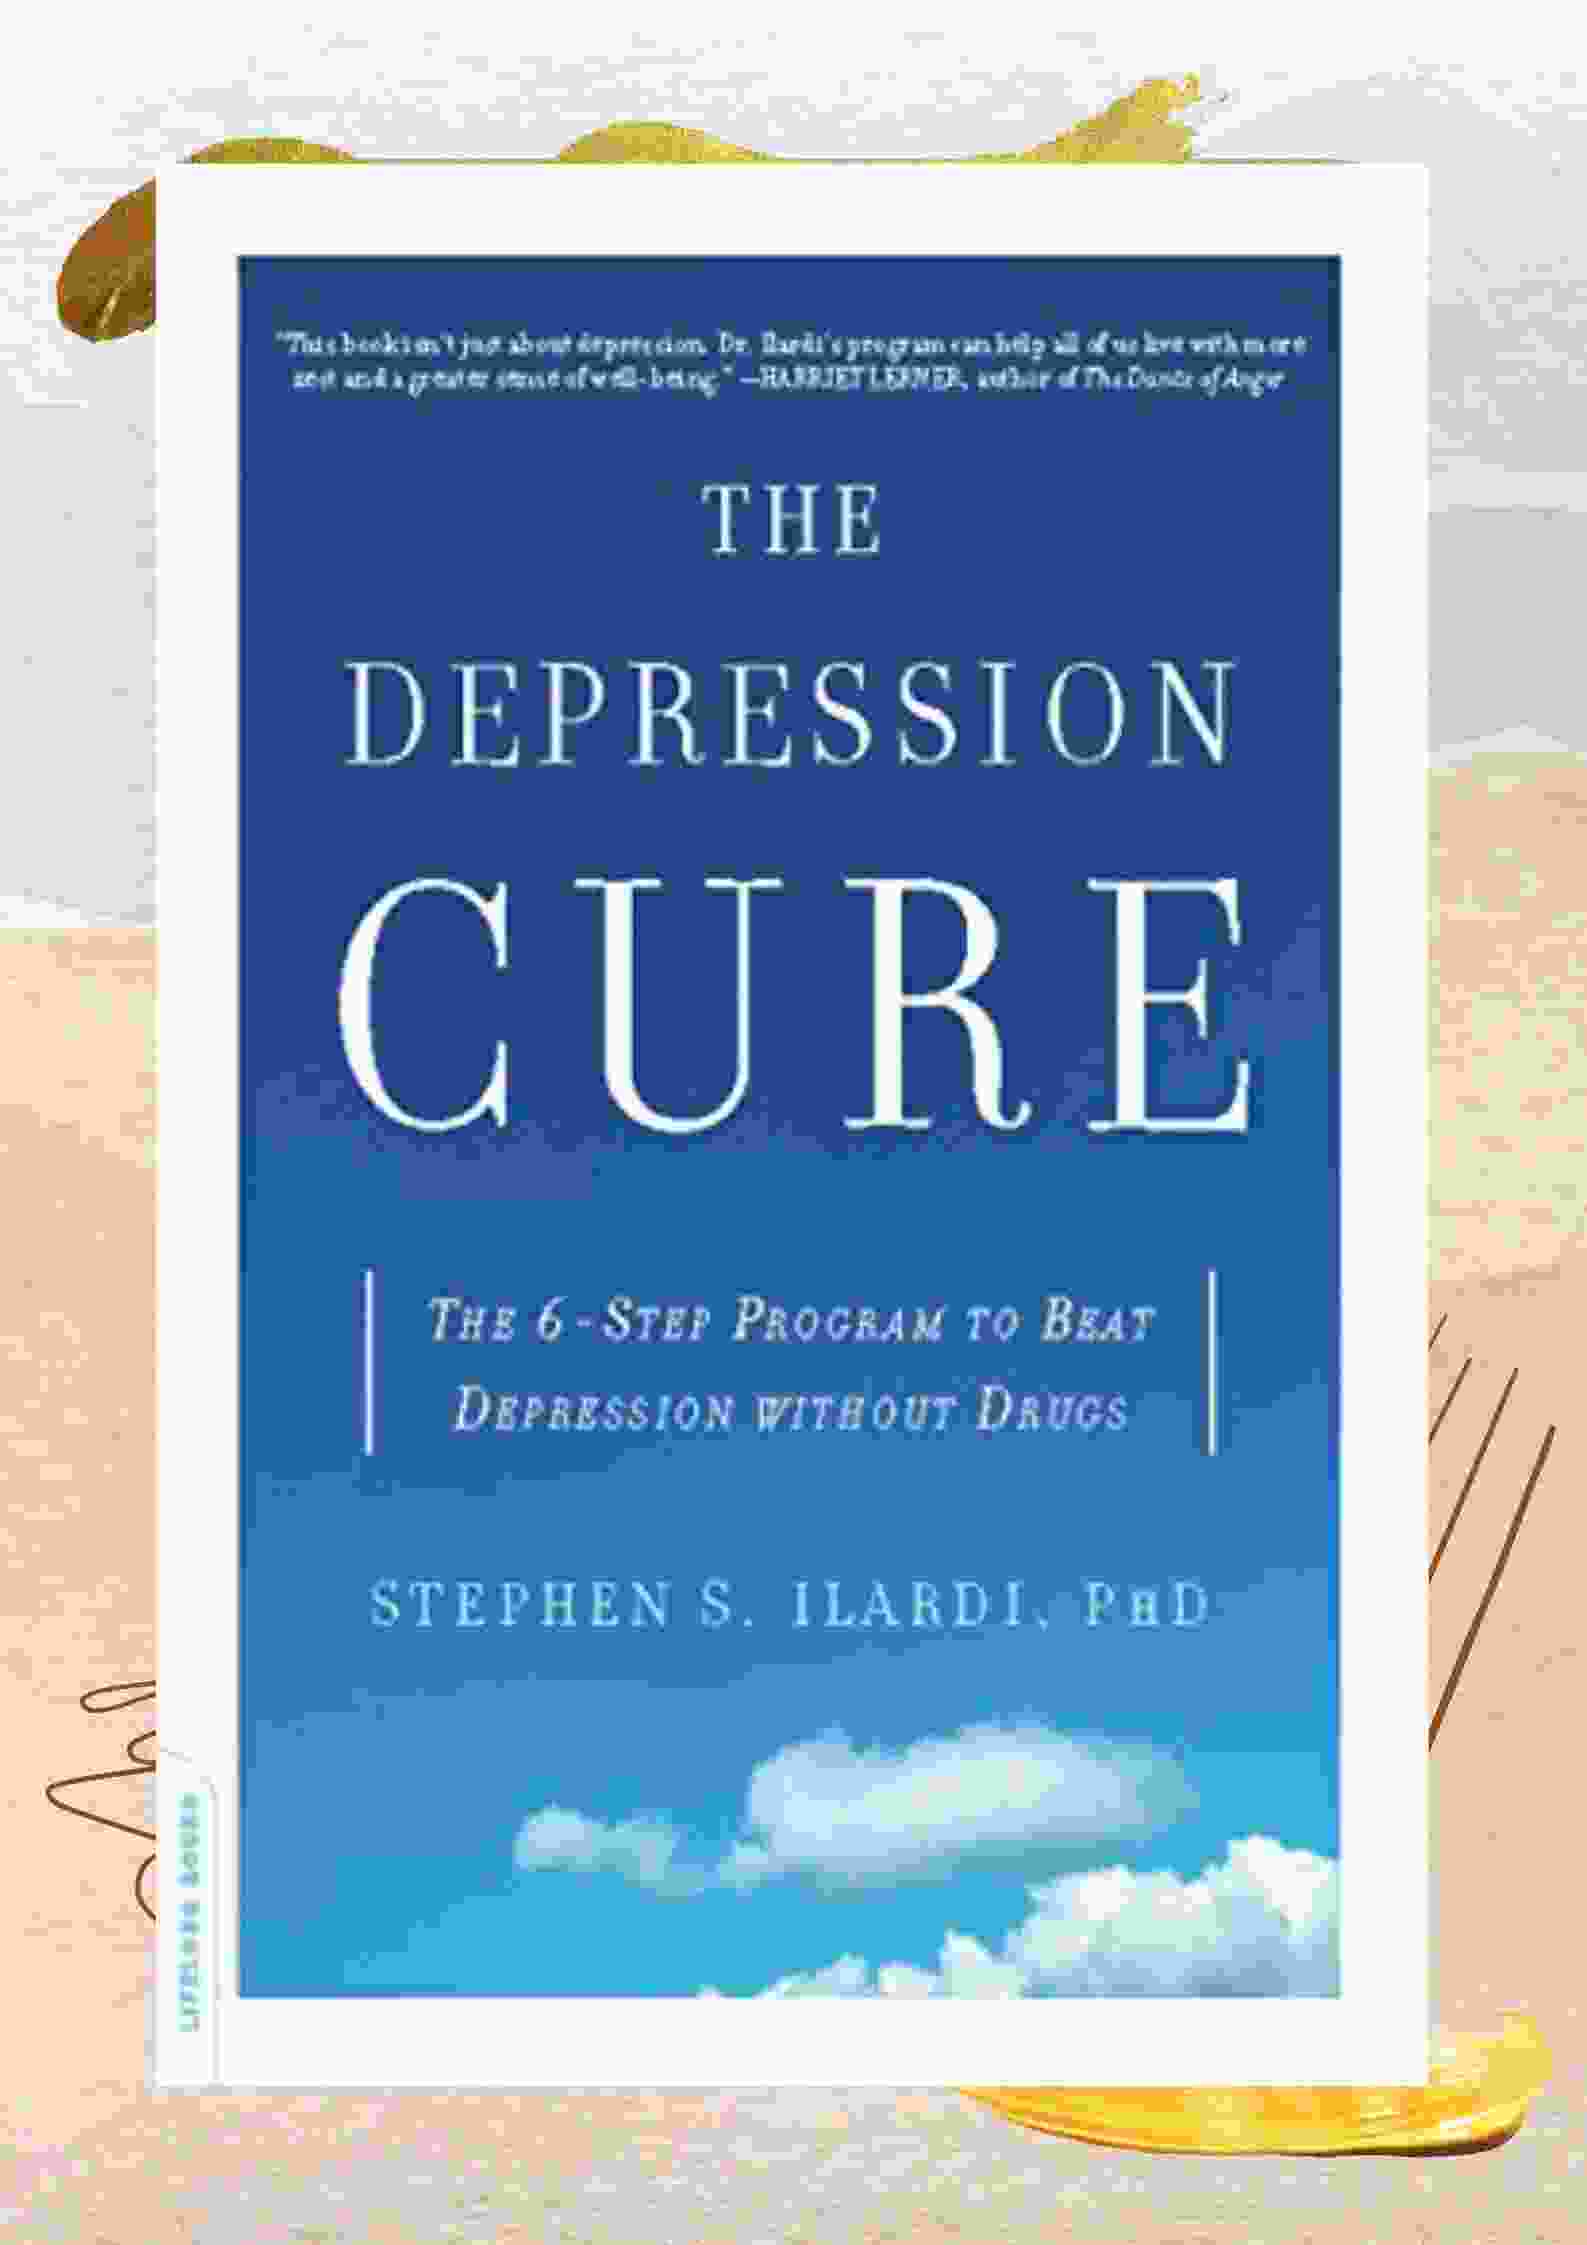 The-Depression-Cure-Book-Summary-The-6-Step-Program-to-Beat-Depression-without-Drugs-by-Stephen-S.-Ilardi